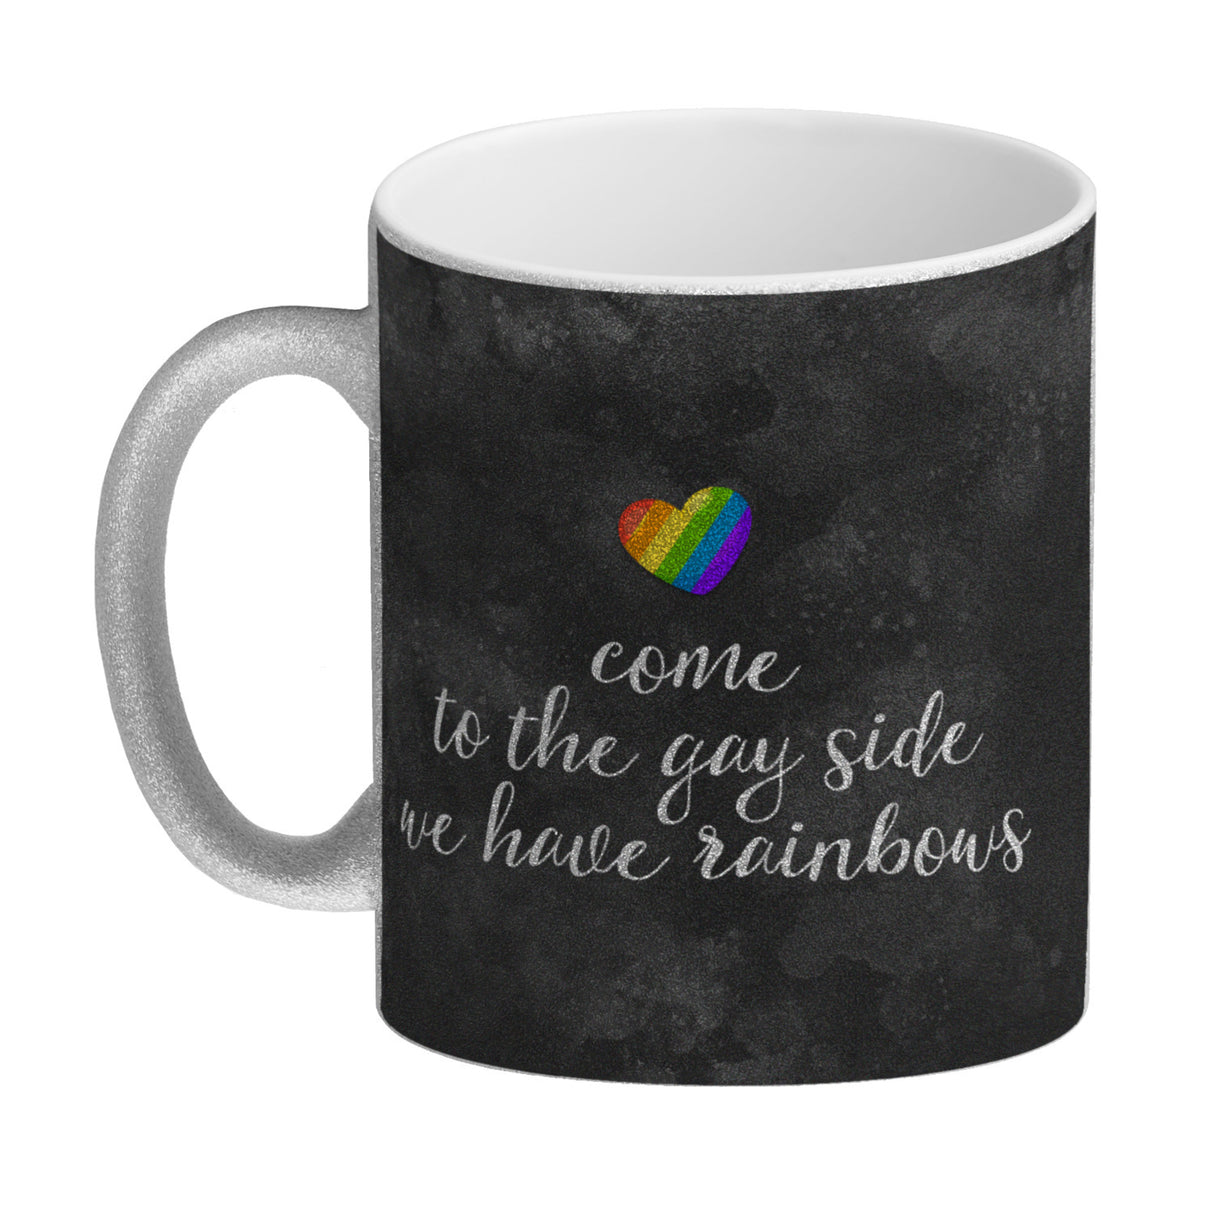 Kaffeebecher mit Spruch: Come to the gay side, we ...